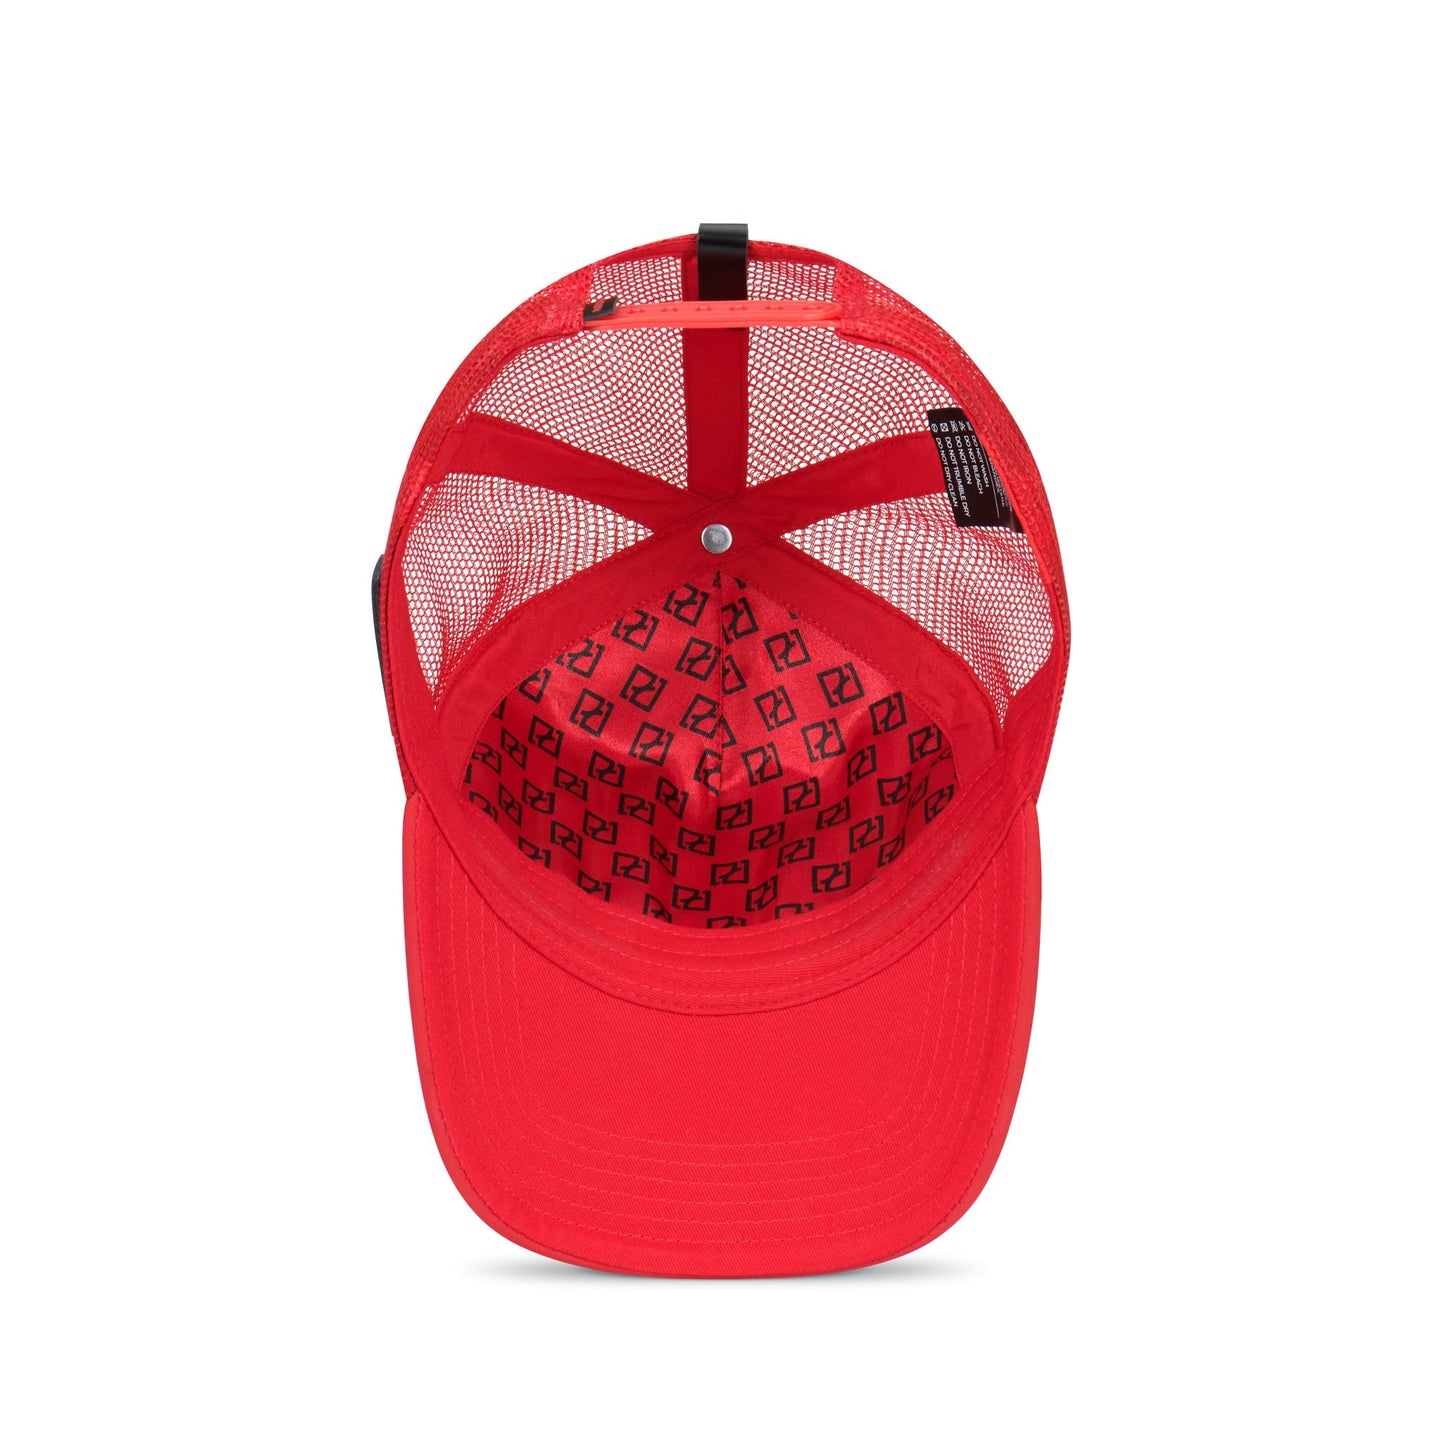 Partch Trucker Hat Red with PARTCH-Clip Exsyt Inside View